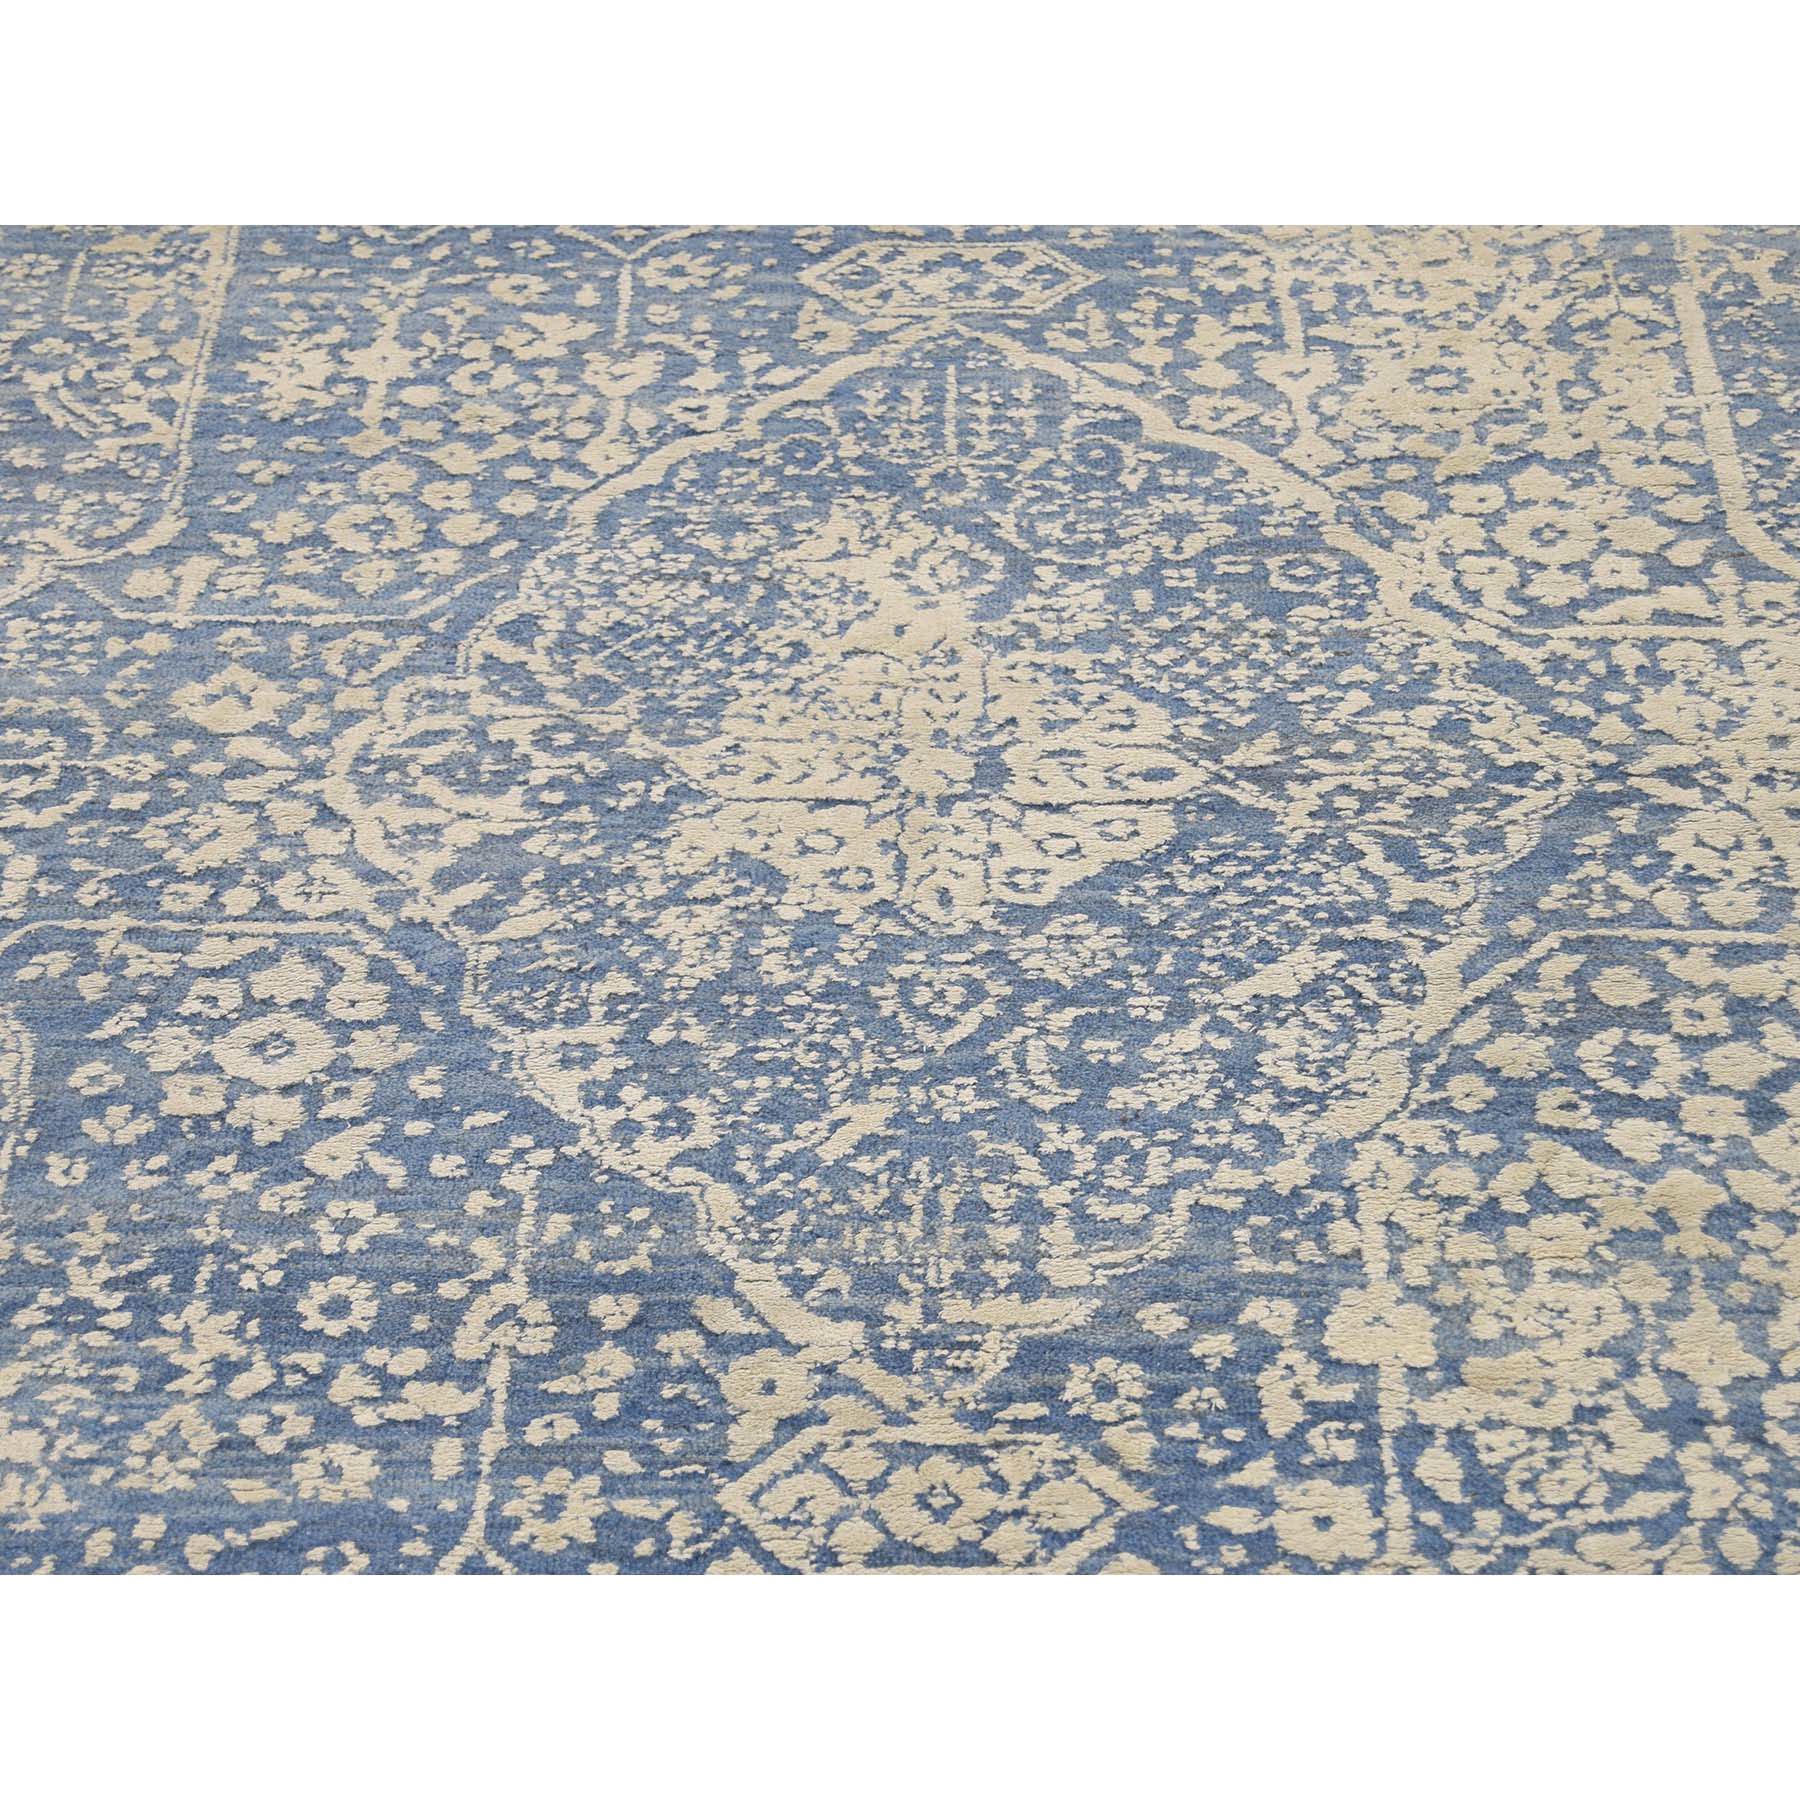 5-1--x7- Denim Blue Wool and Pure Silk Hand-Knotted Broken Persian Design Rug 